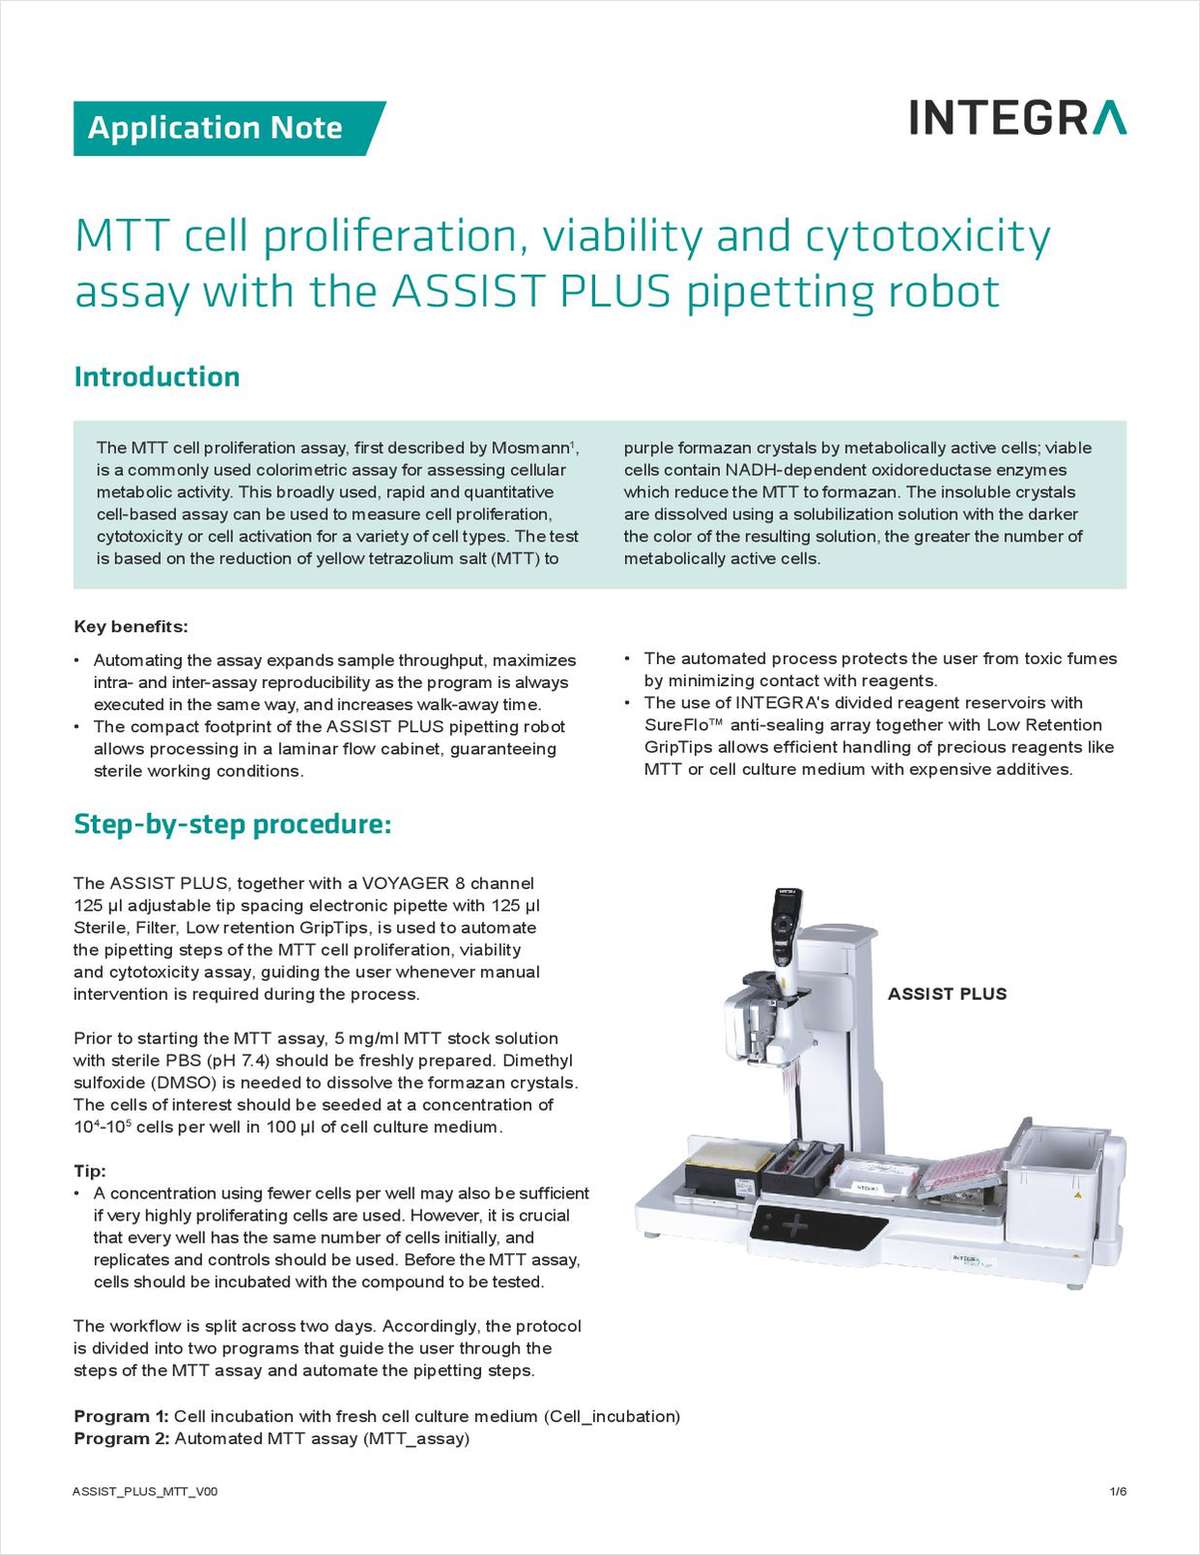 MTT Cell Proliferation, Viability, and Cytotoxicity Assay with the Assist Plus Pipetting Robot